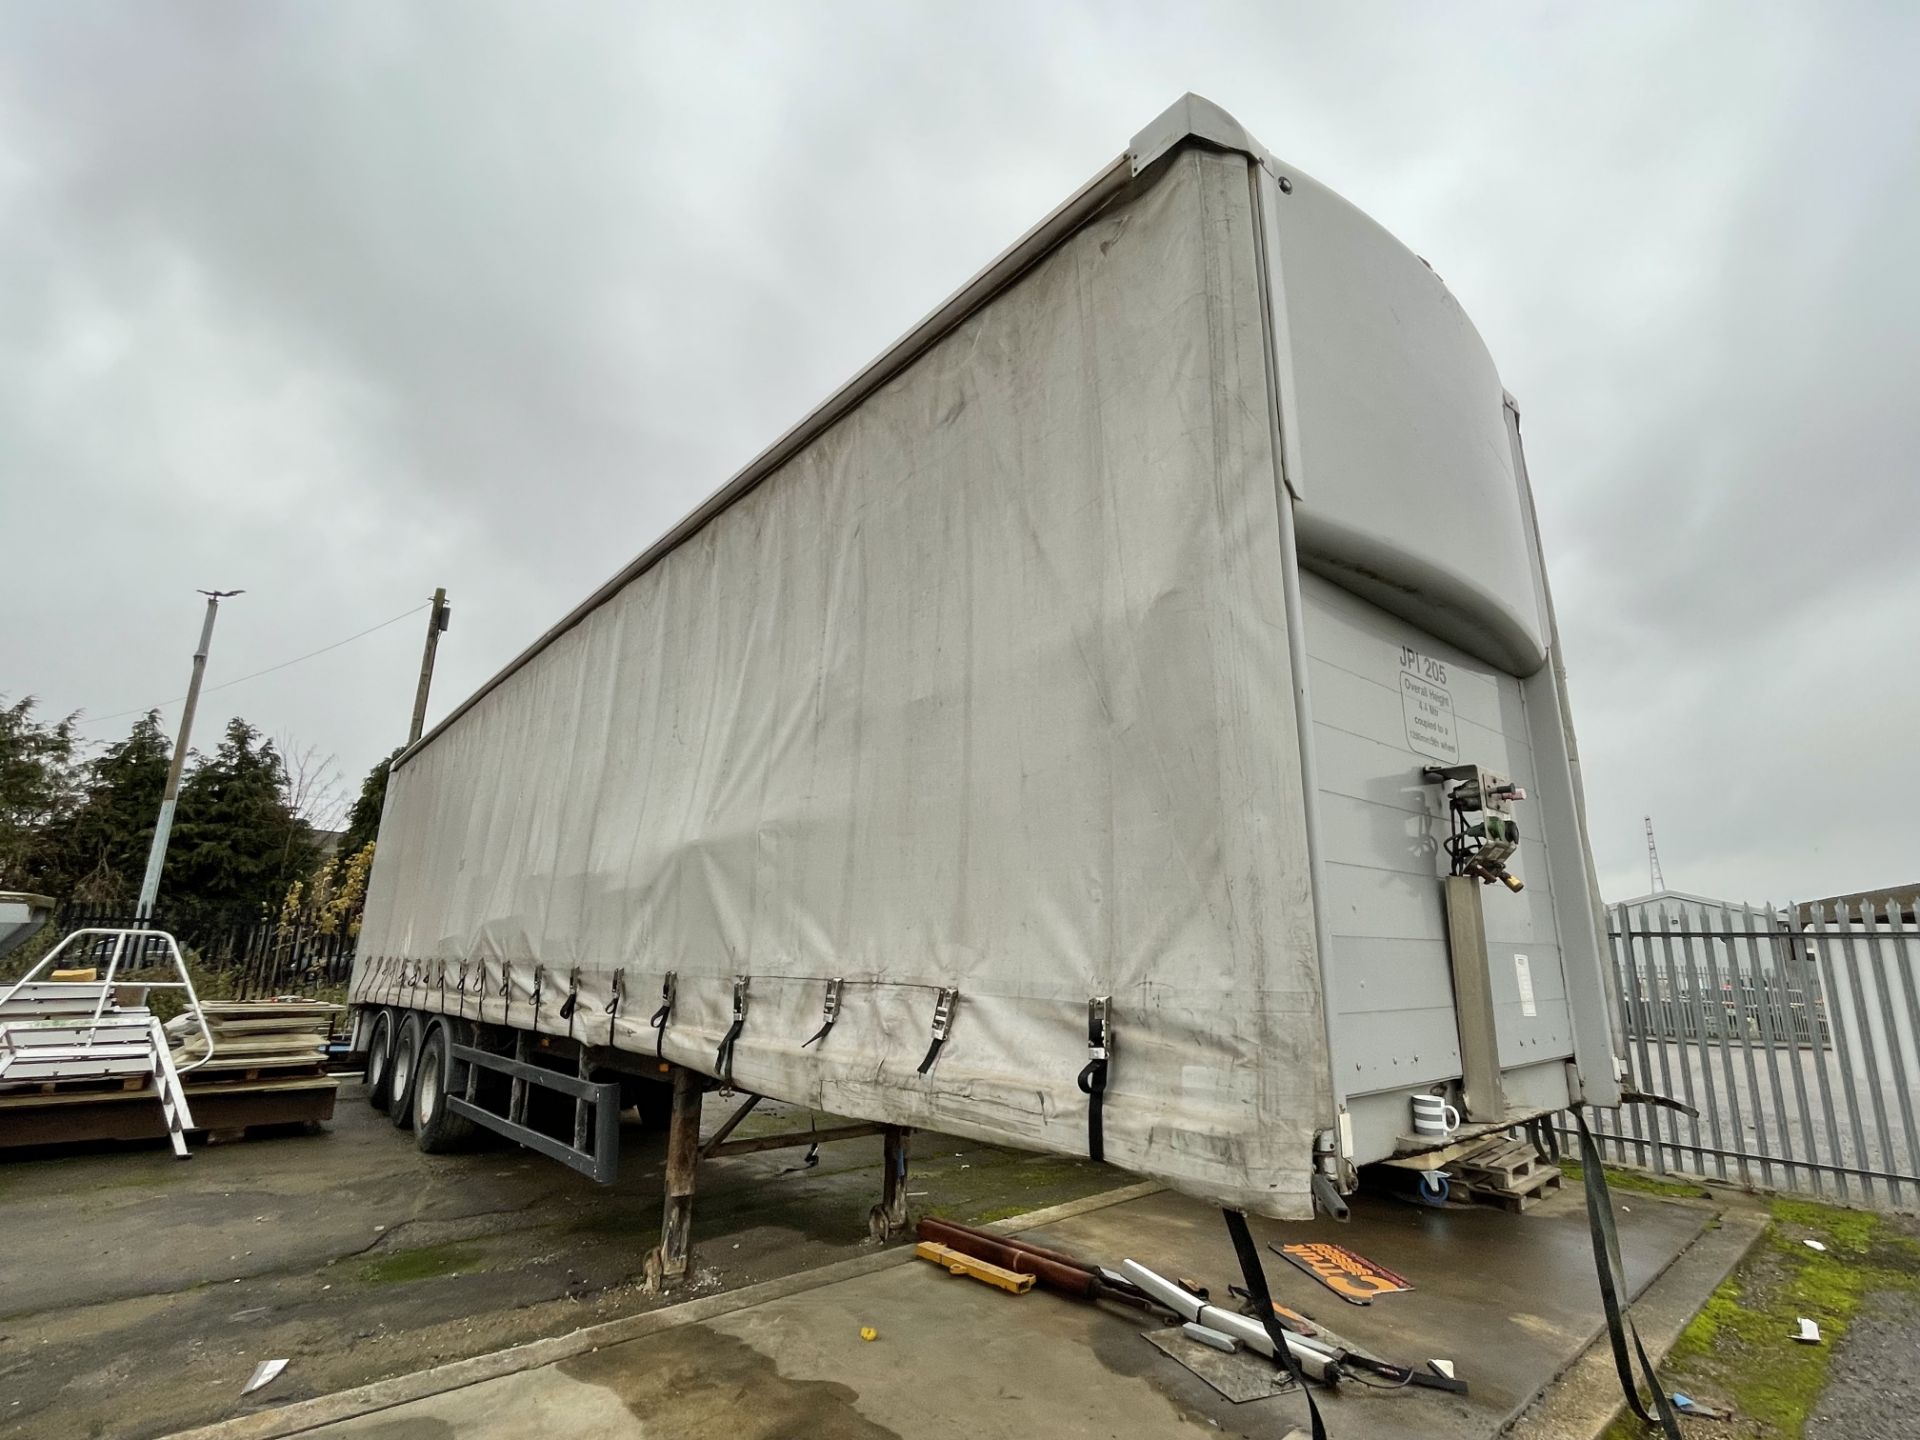 2005 SDC Trailers 45' Artic Curtainside Tri-Axle Trailer with Rear Barn Doors, Design Weight: 39, - Image 13 of 13